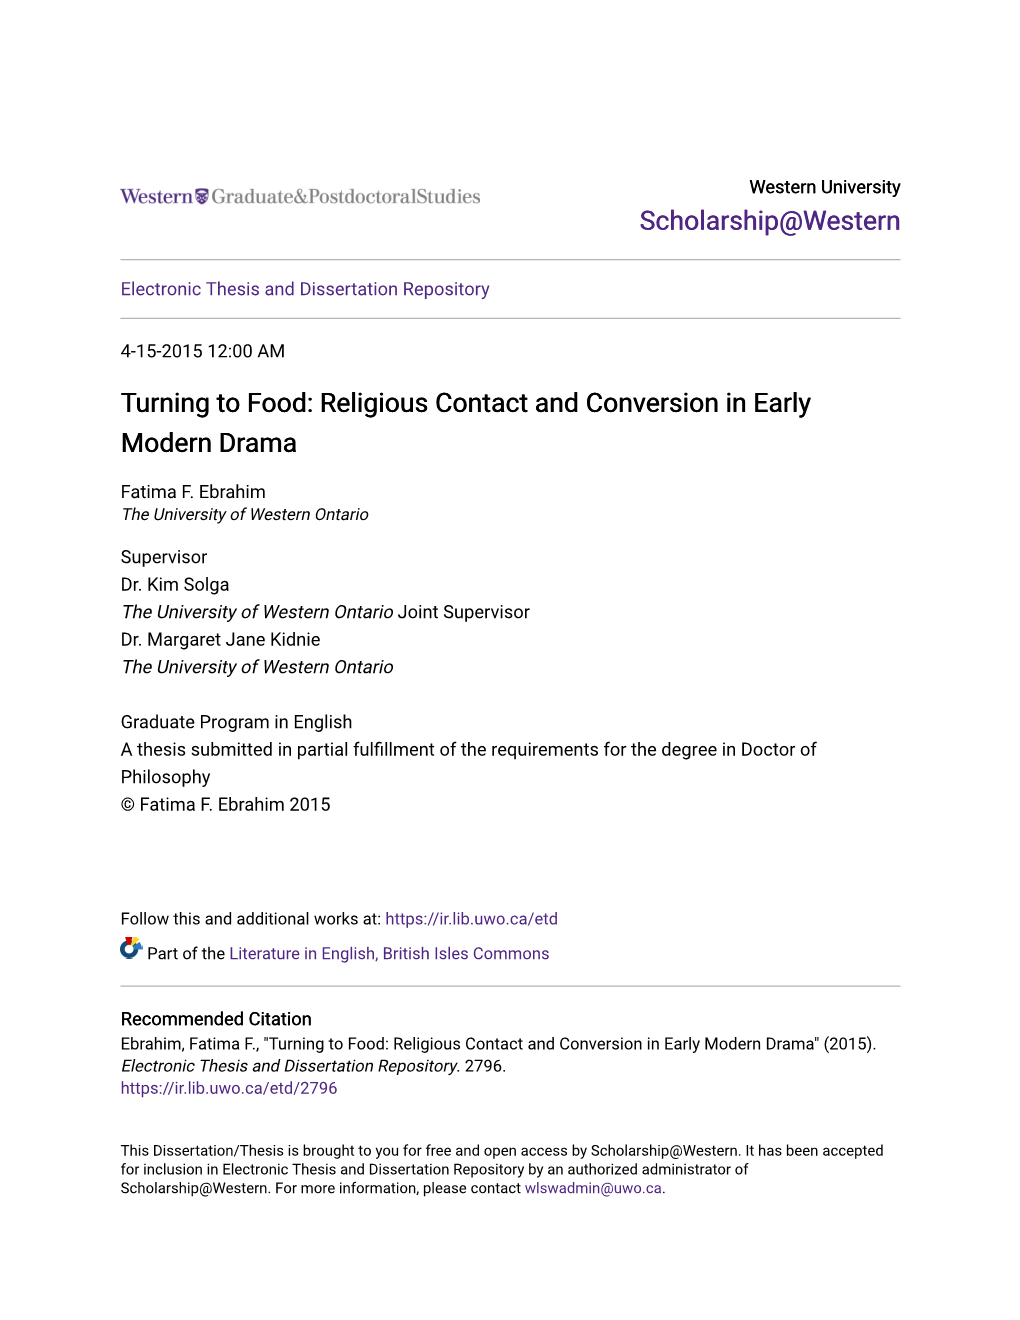 Religious Contact and Conversion in Early Modern Drama